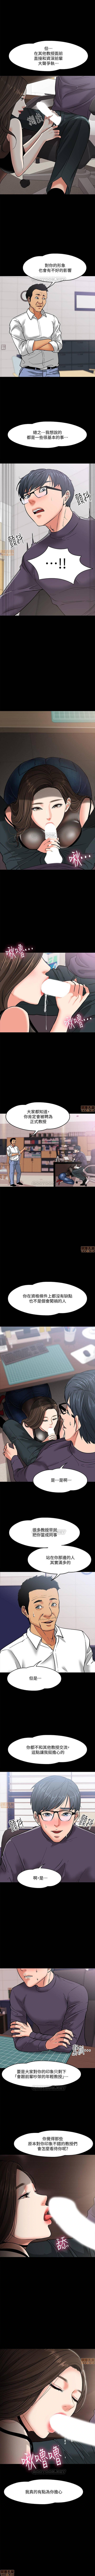 PROFESSOR, ARE YOU JUST GOING TO LOOK AT ME? | DESIRE SWAMP | 教授，你還等什麼? Ch. 4 [Chinese] Manhwa 6